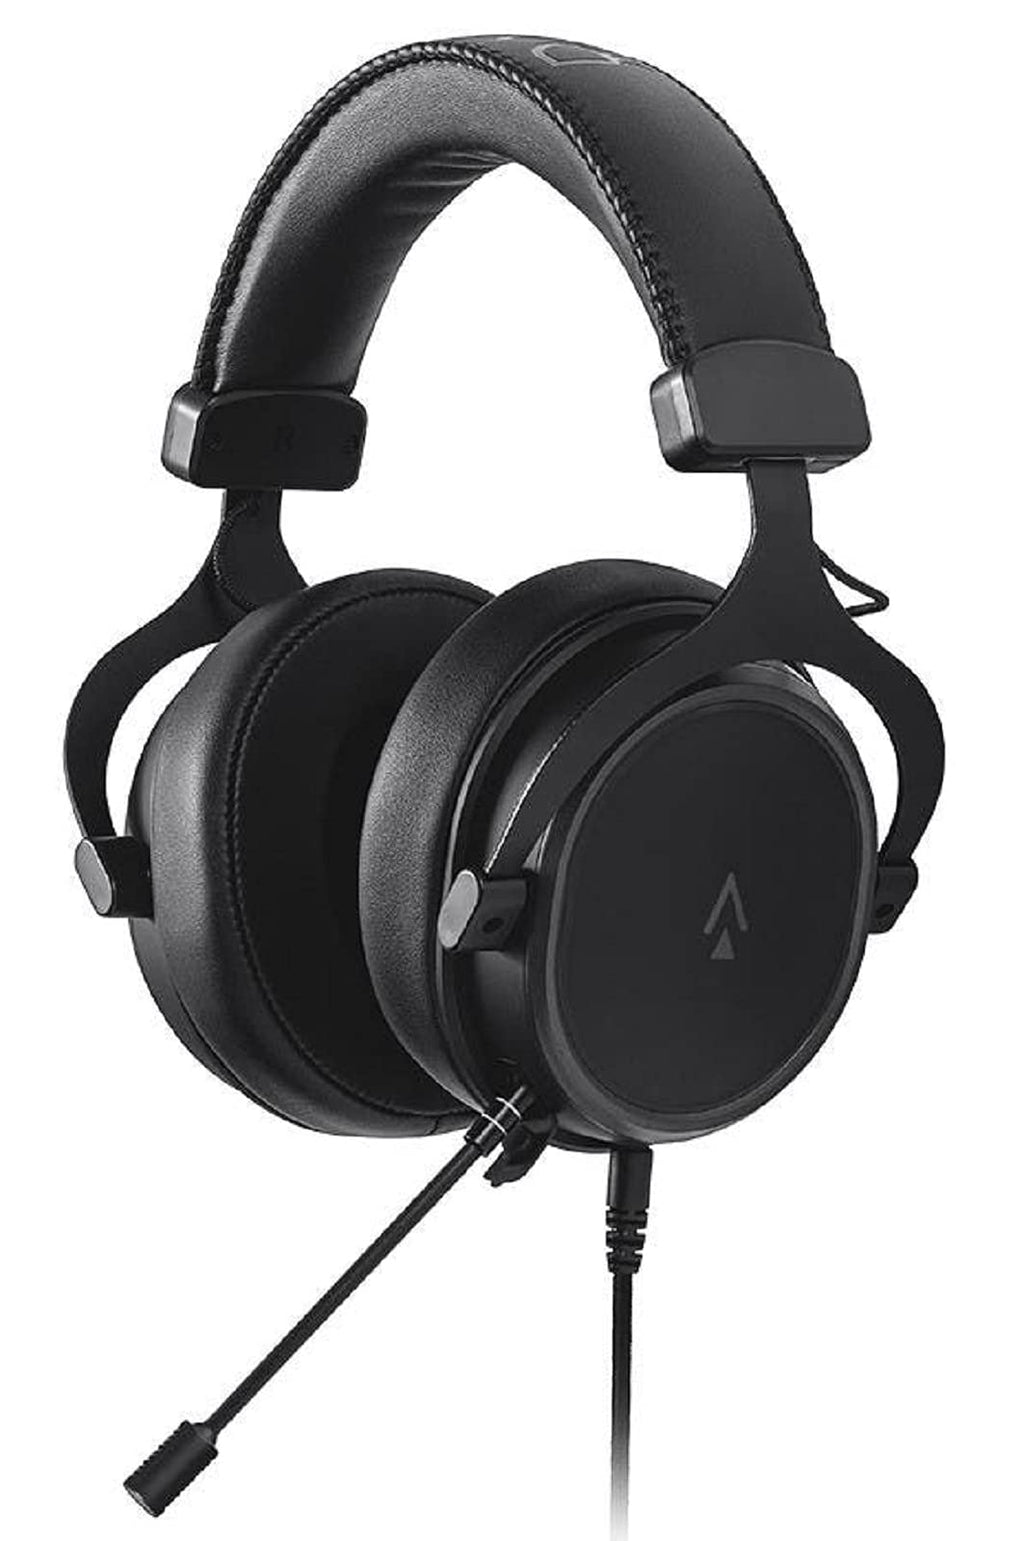  [AUSTRALIA] - Monoprice Supernova Universal 3.5mm Gaming Headset - 53mm Driver, Detachable Unidirectional Mic, PU Leather/Aluminum, Compatible with PC, Consoles, Mobile Devices - Dark Matter Series